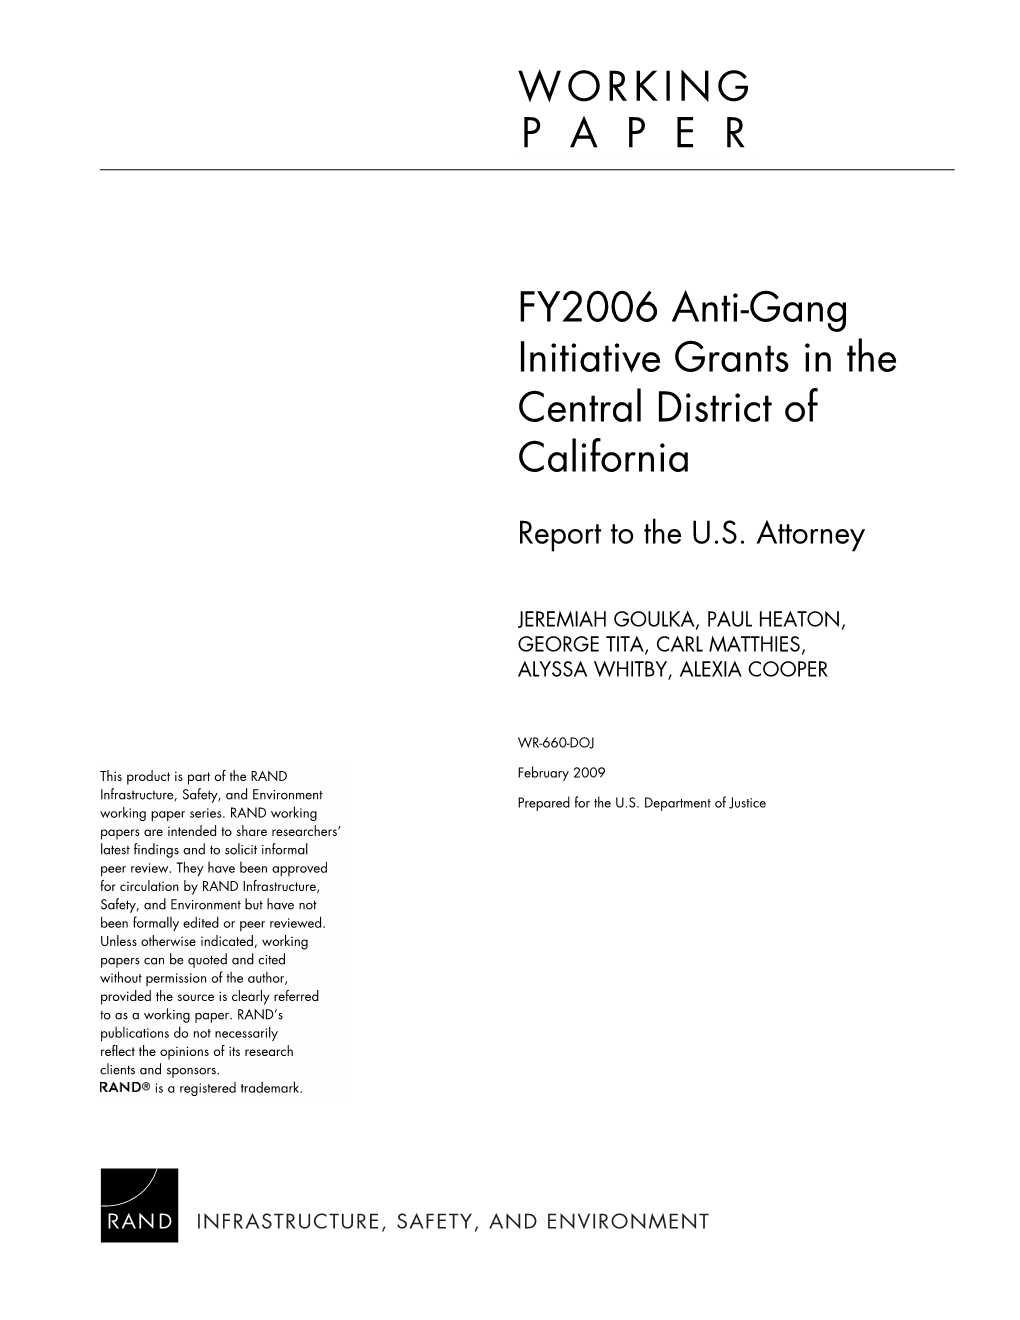 FY2006 Anti-Gang Initiative Grants in the Central District of California